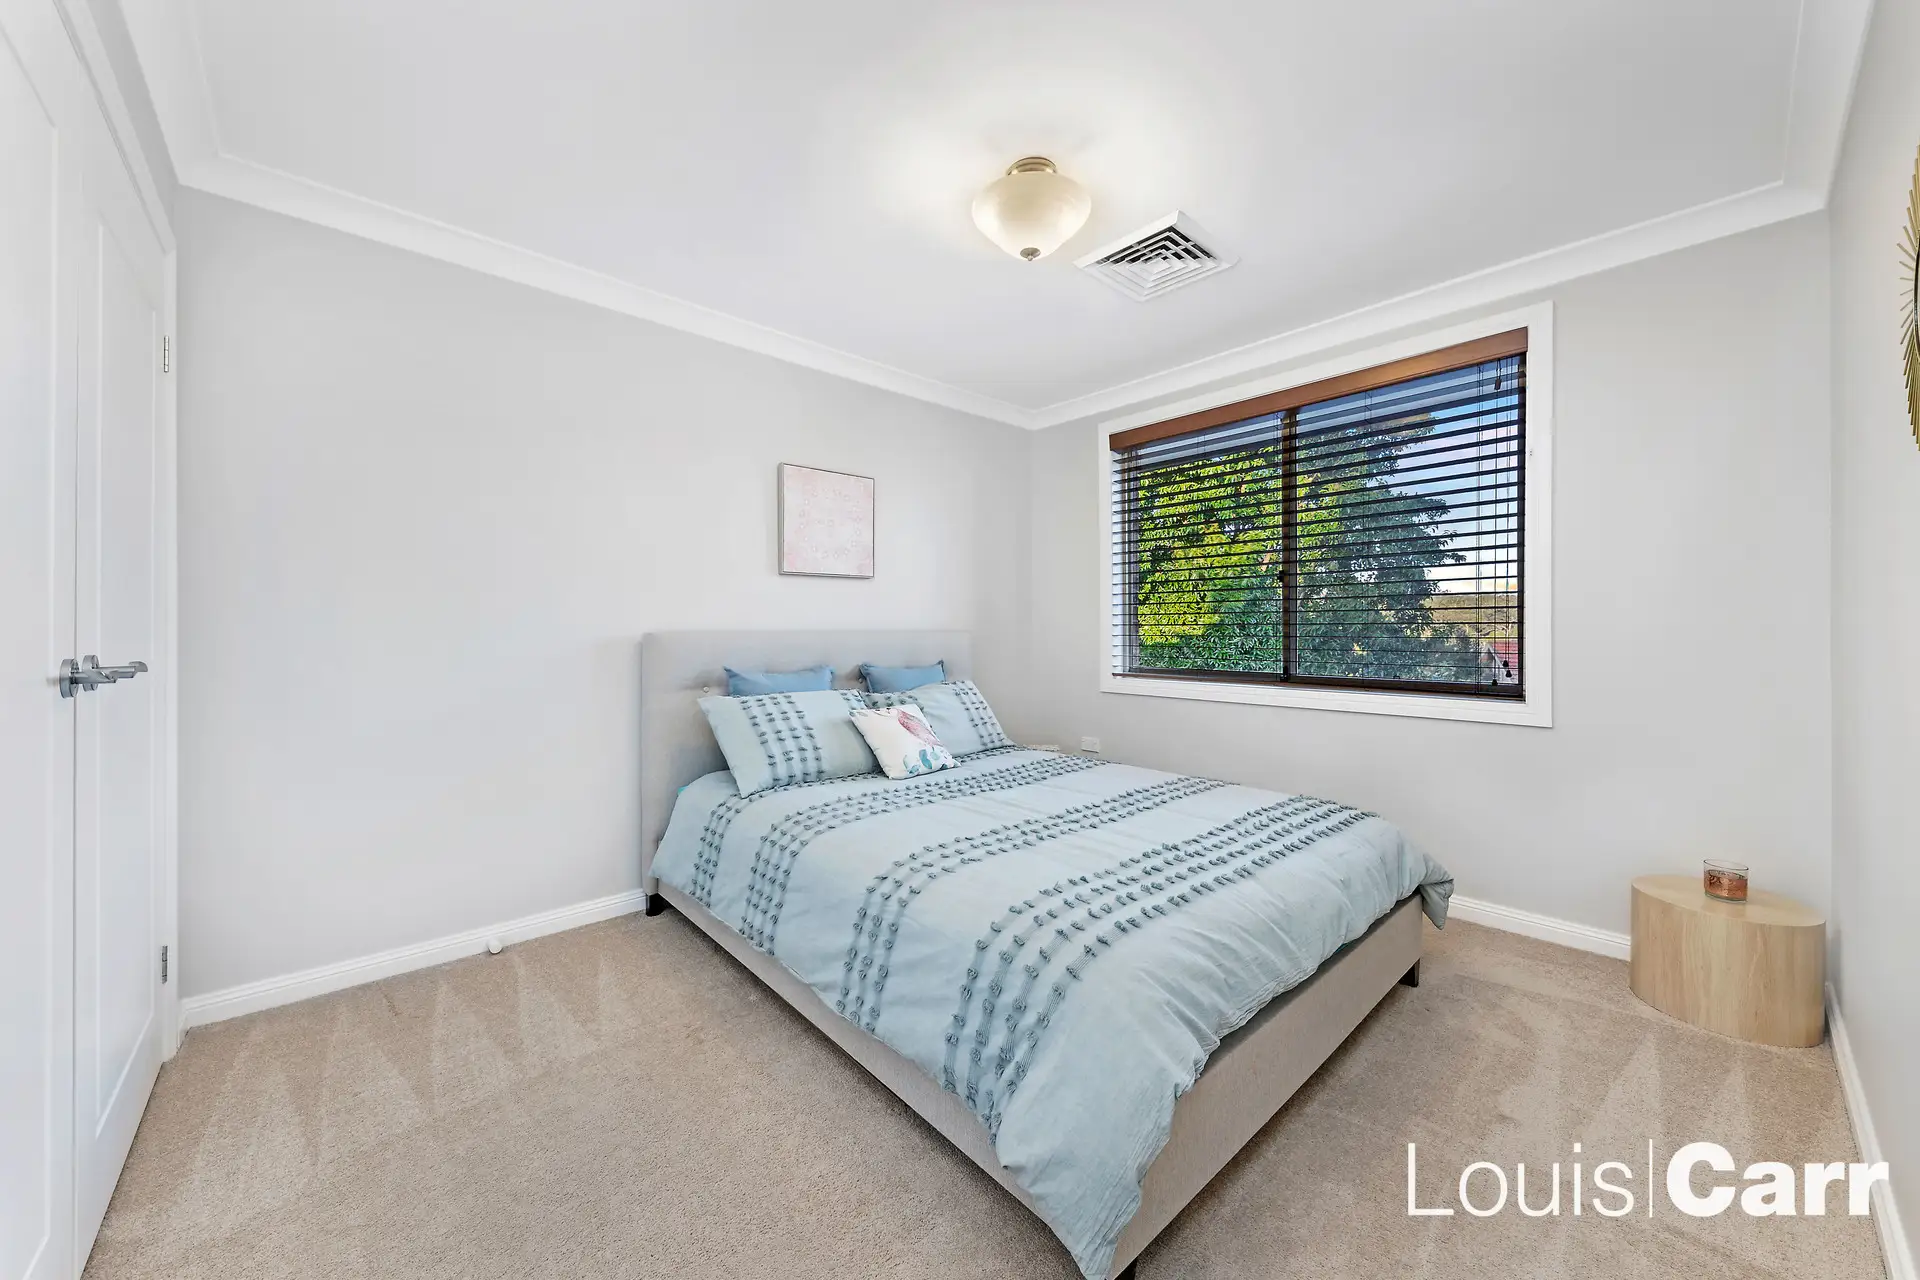 Photo #13: 23 Yaringa Road, Castle Hill - Sold by Louis Carr Real Estate